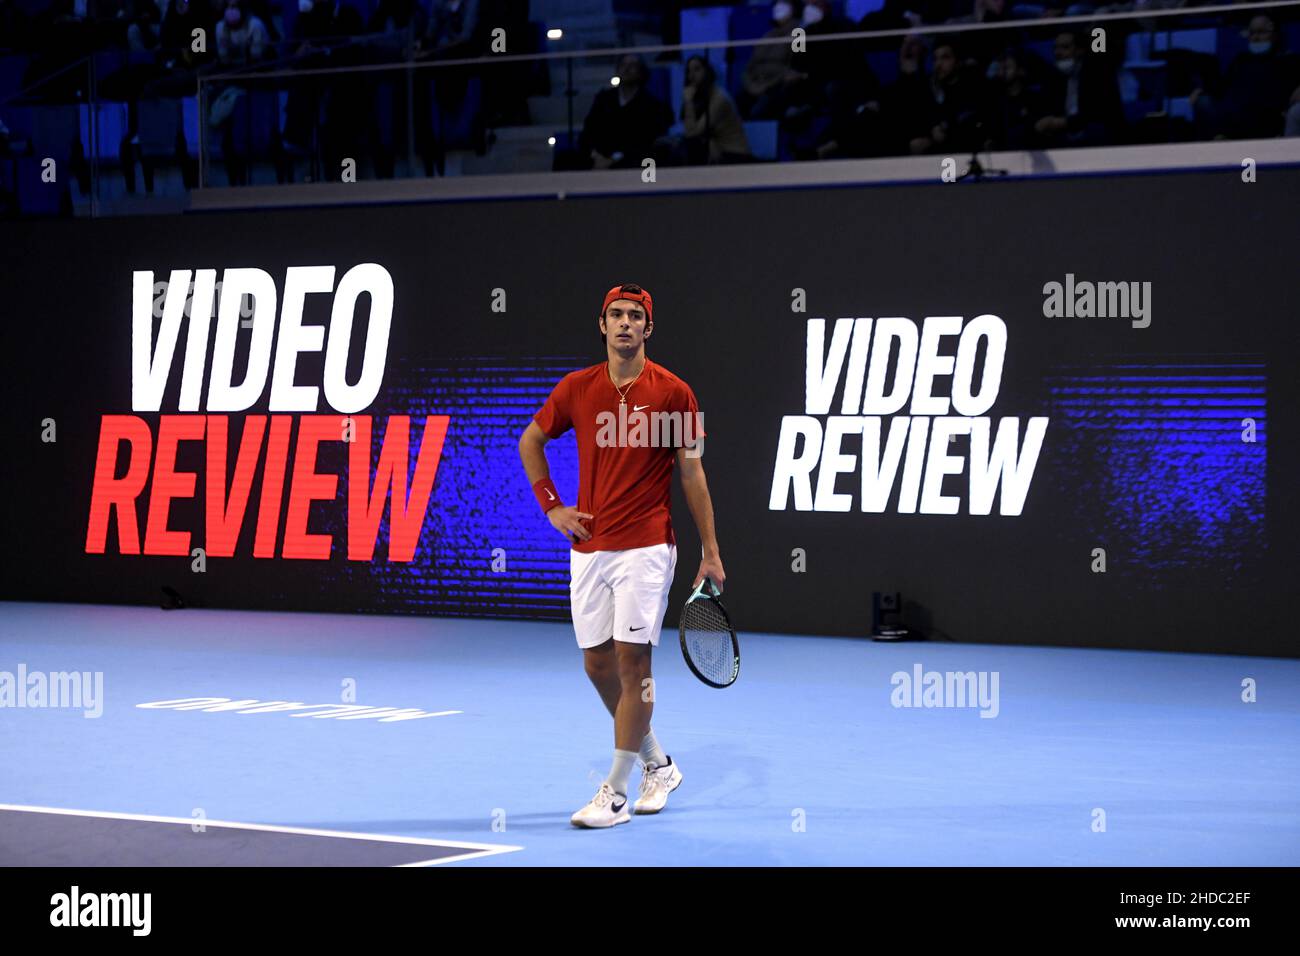 Video review on digital scoreboard during the Next Gen ATP Finals, in Milan. Stock Photo